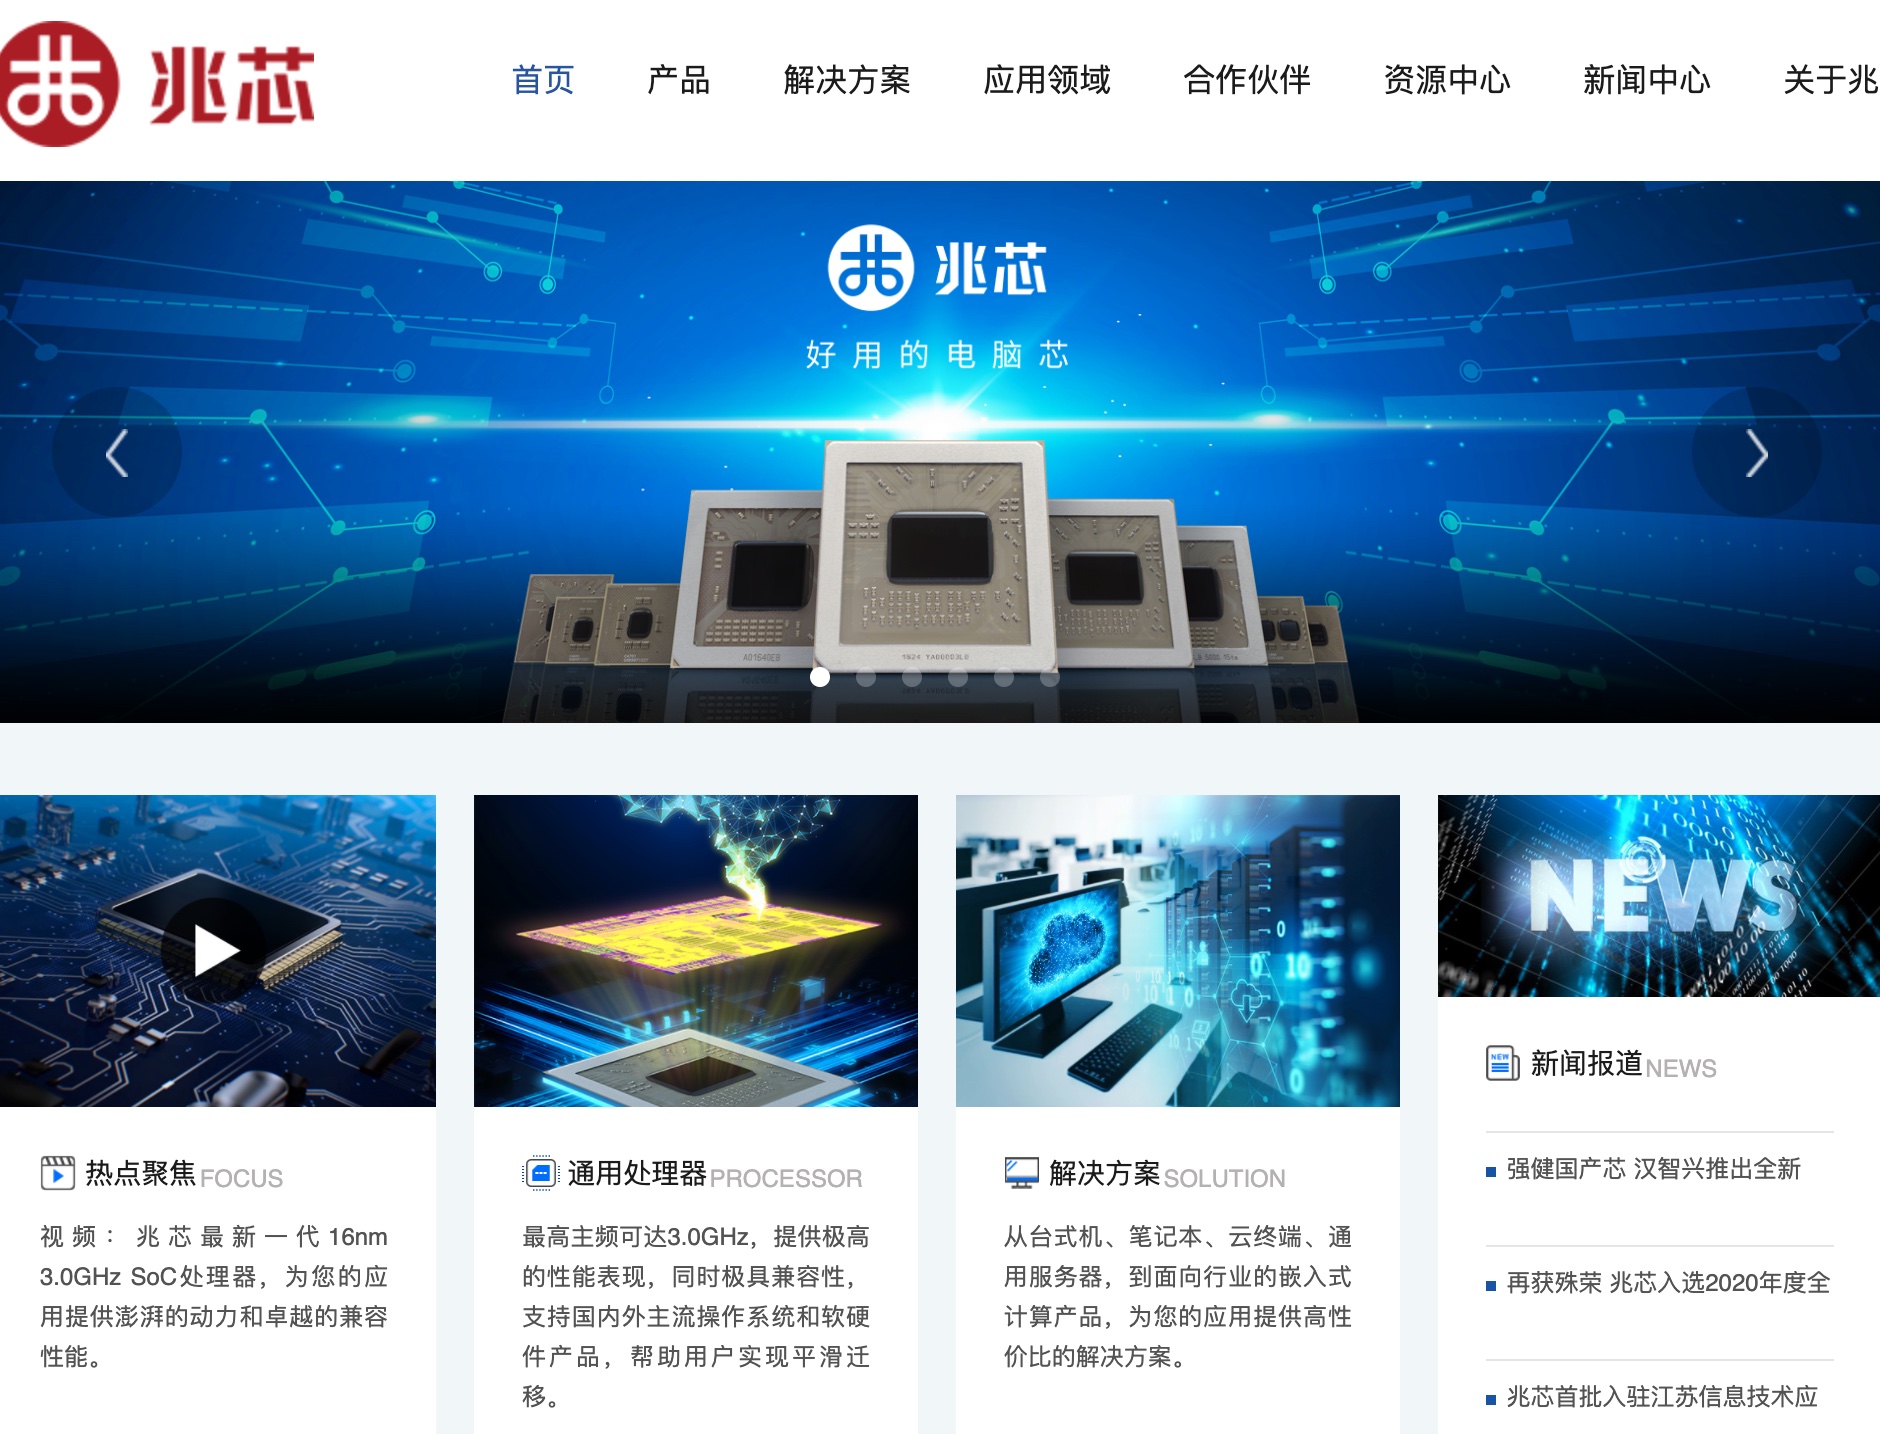 Chinese CPU maker Zhaoxin launches new website to better showcase product info-CnTechPost